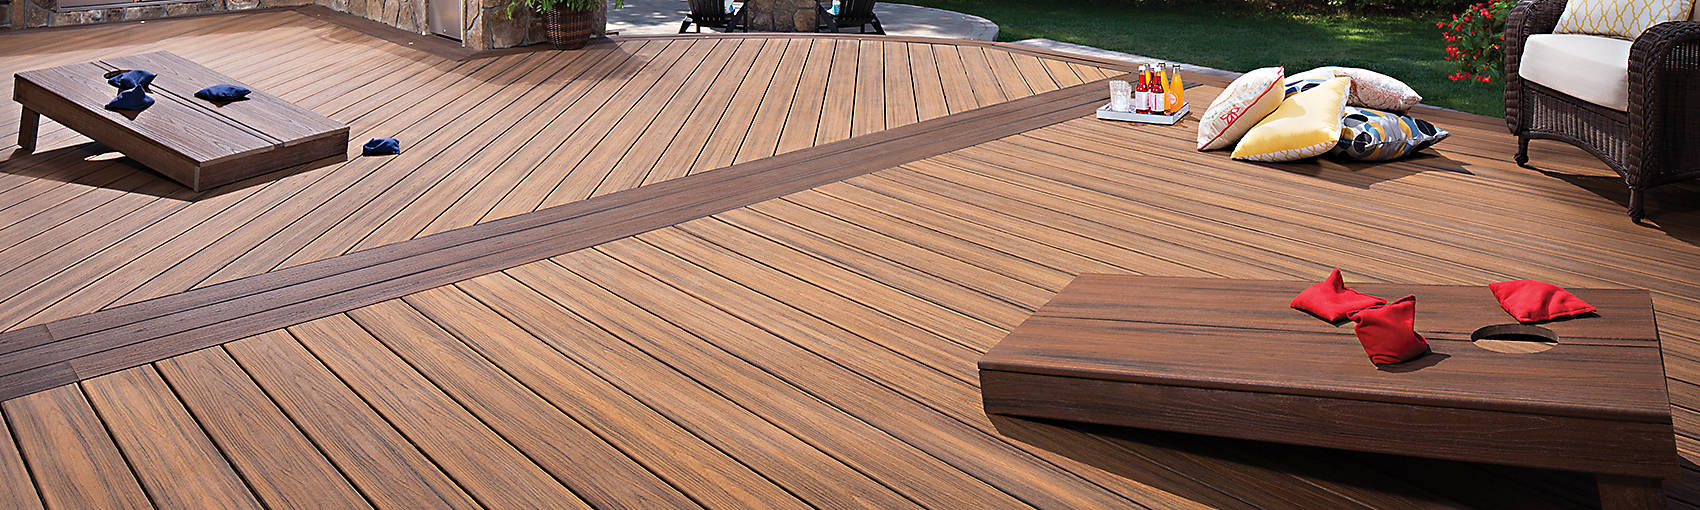 Composite Decking Wpc Wood Alternative Decking Trex intended for size 1700 X 510